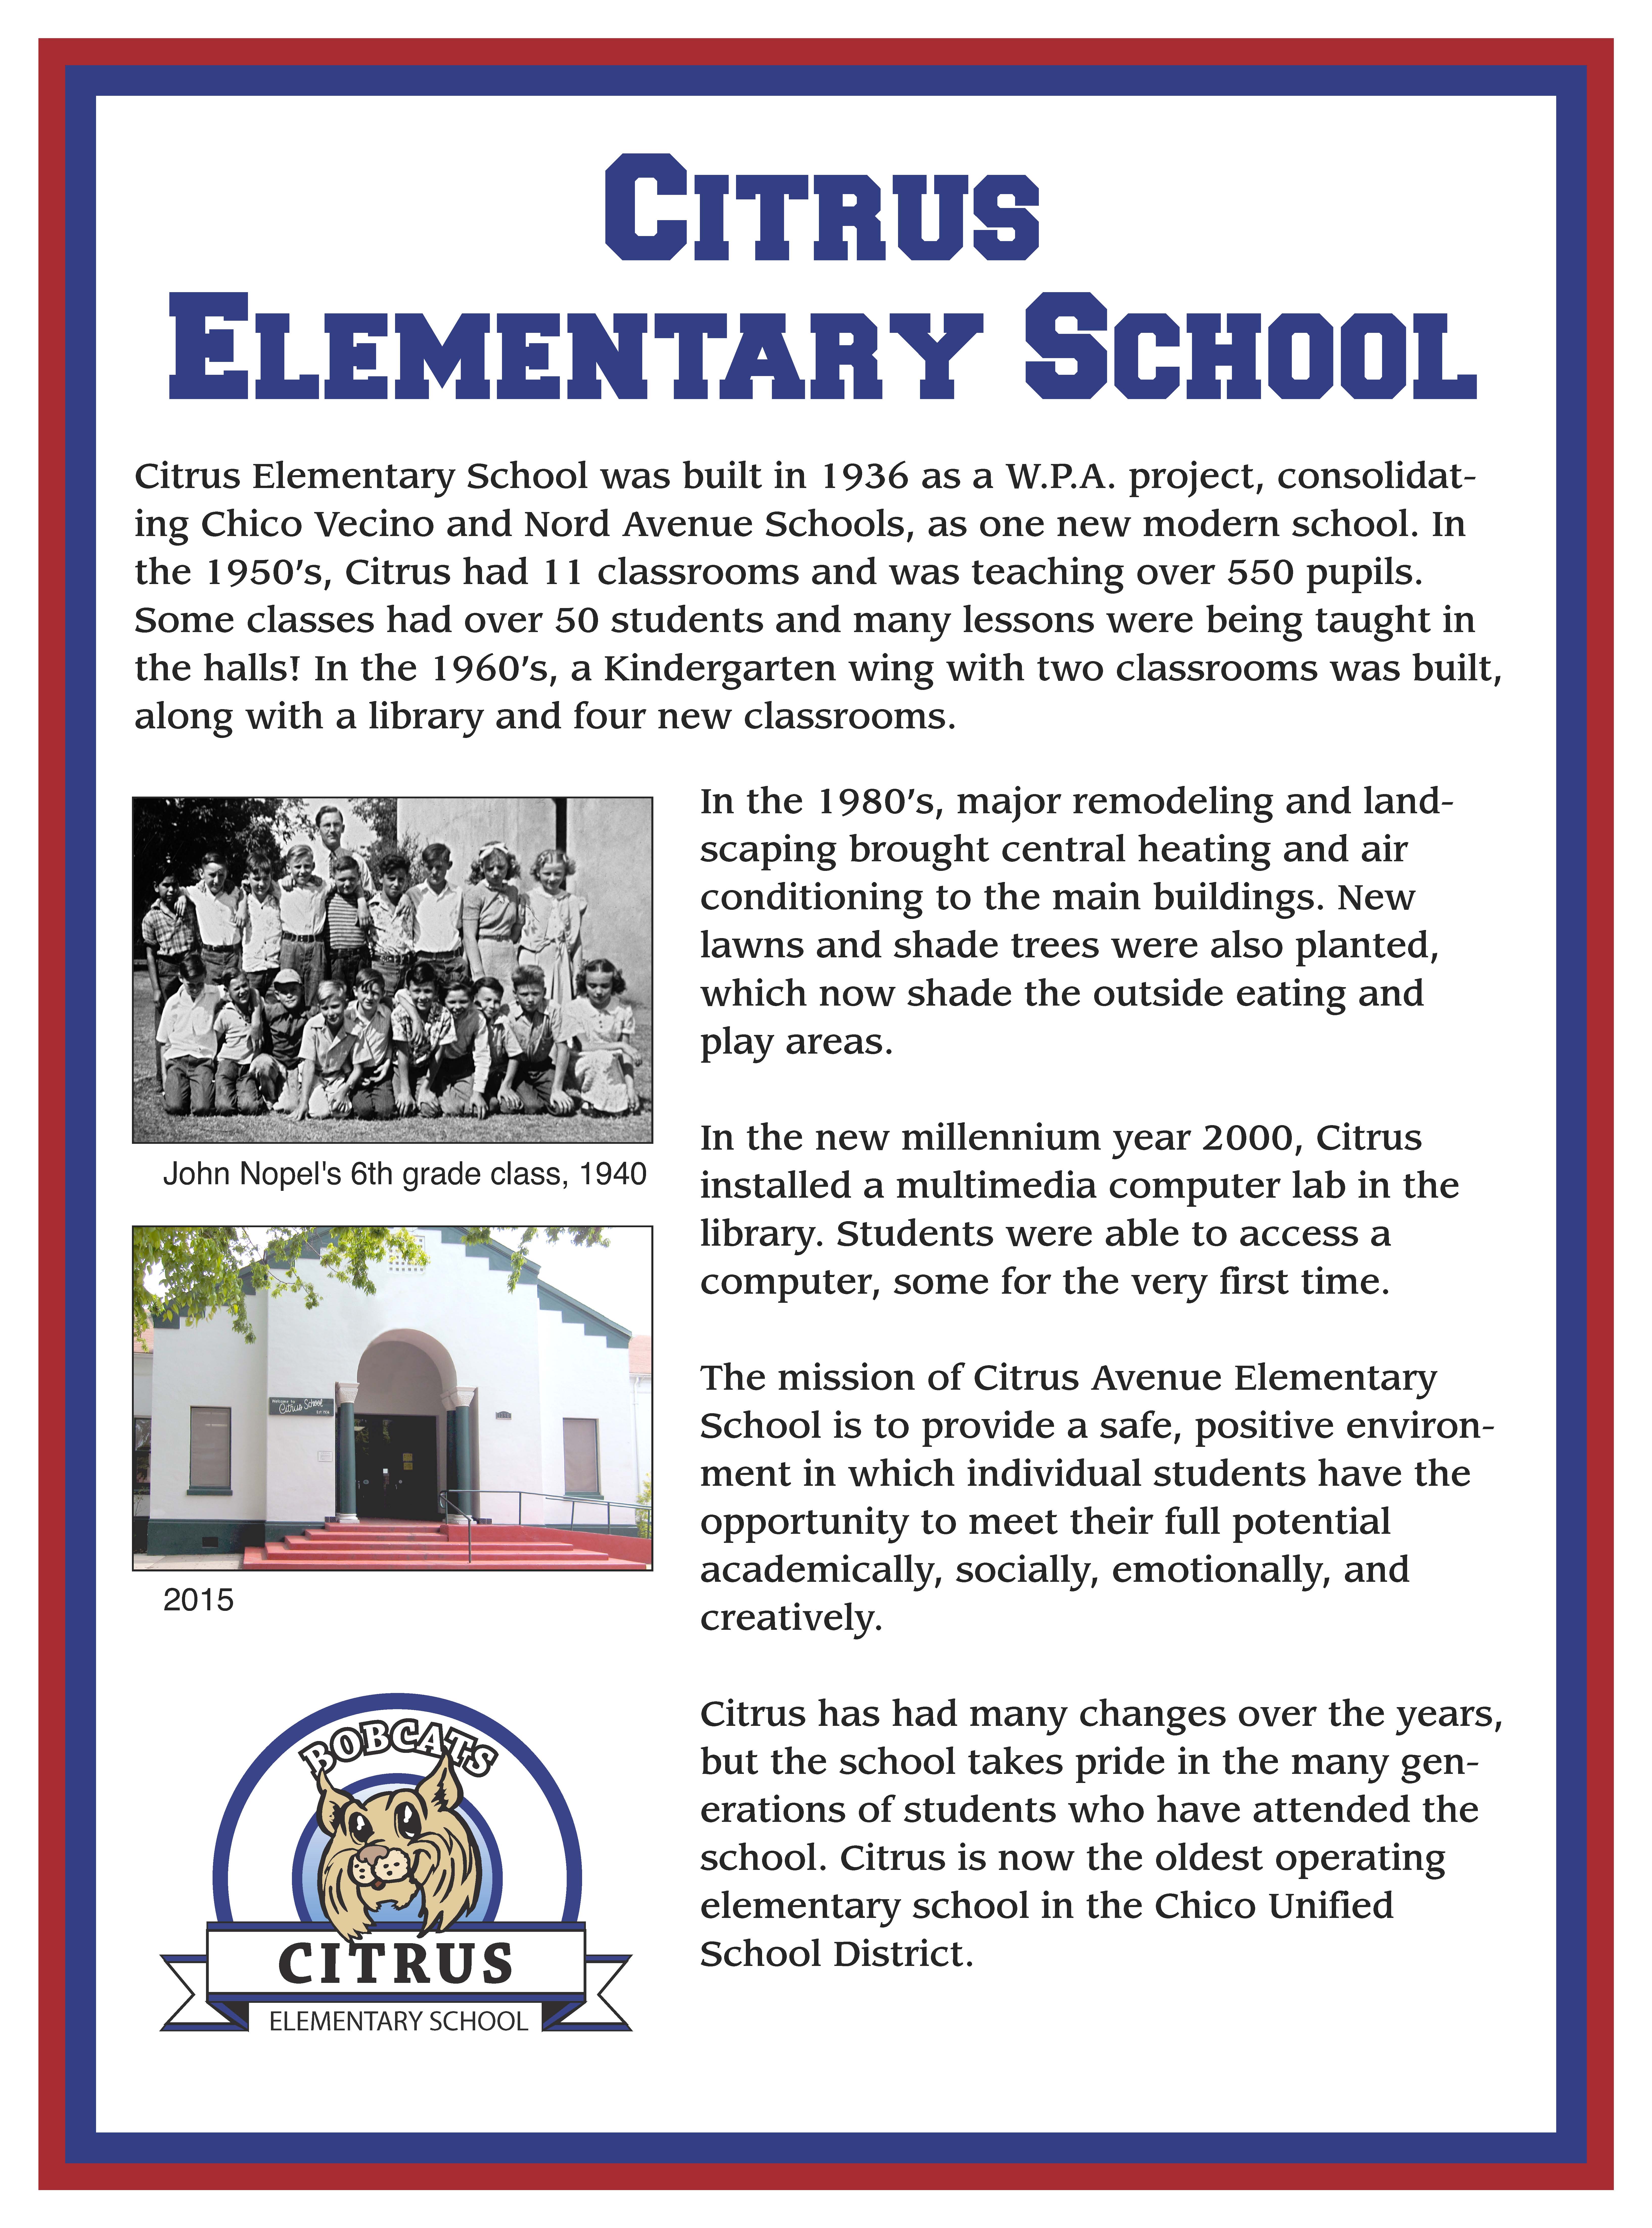 Poster showing history of Citrus Elementary and original photo